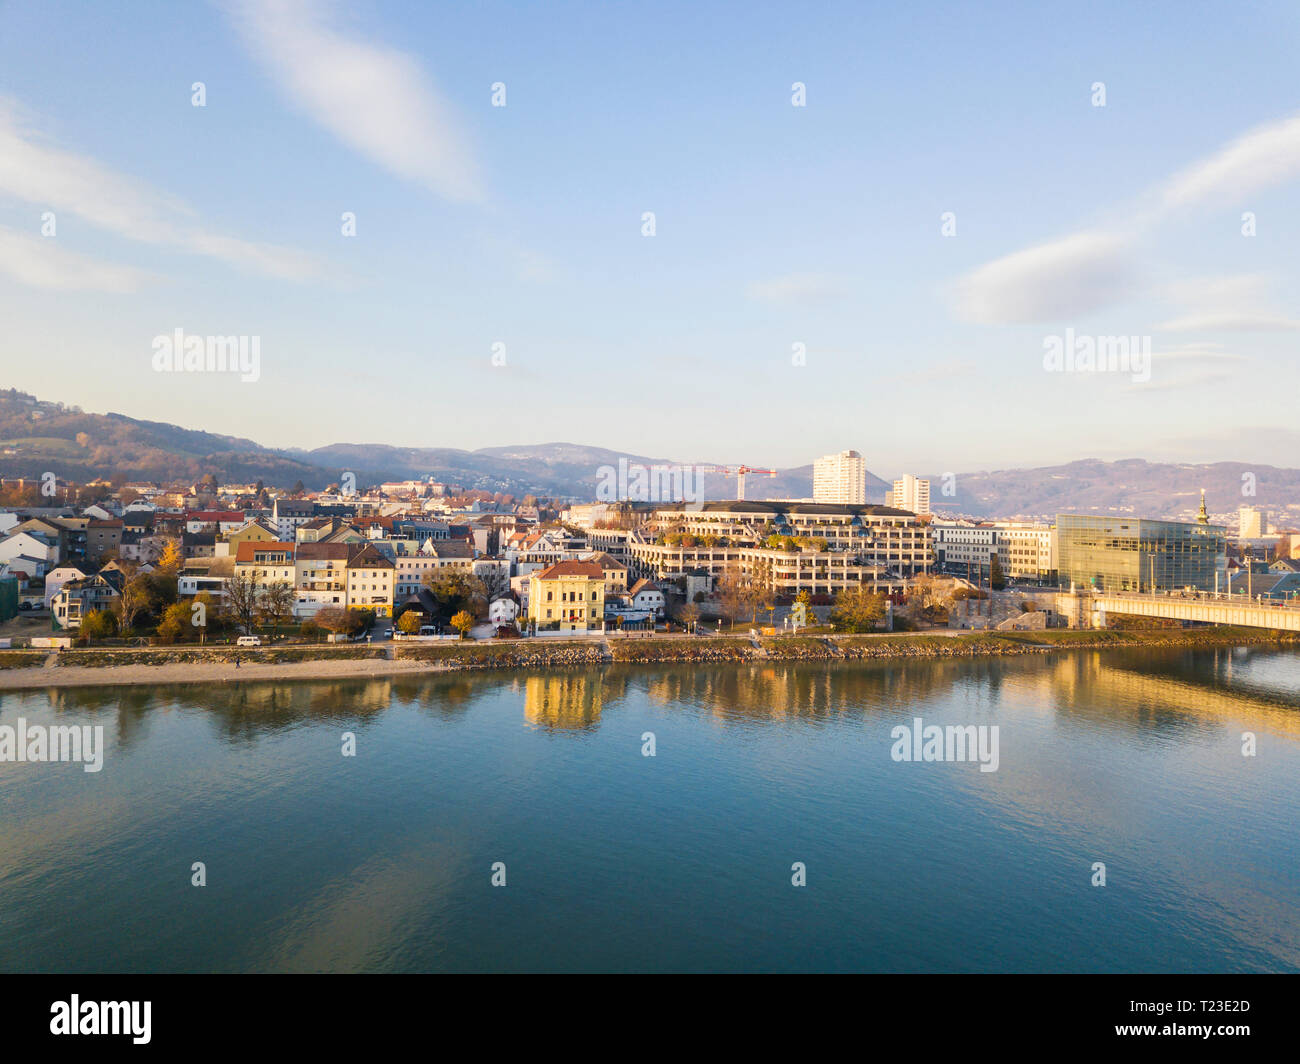 Austria, Linz, view to the city with Danube River in the foreground Stock Photo